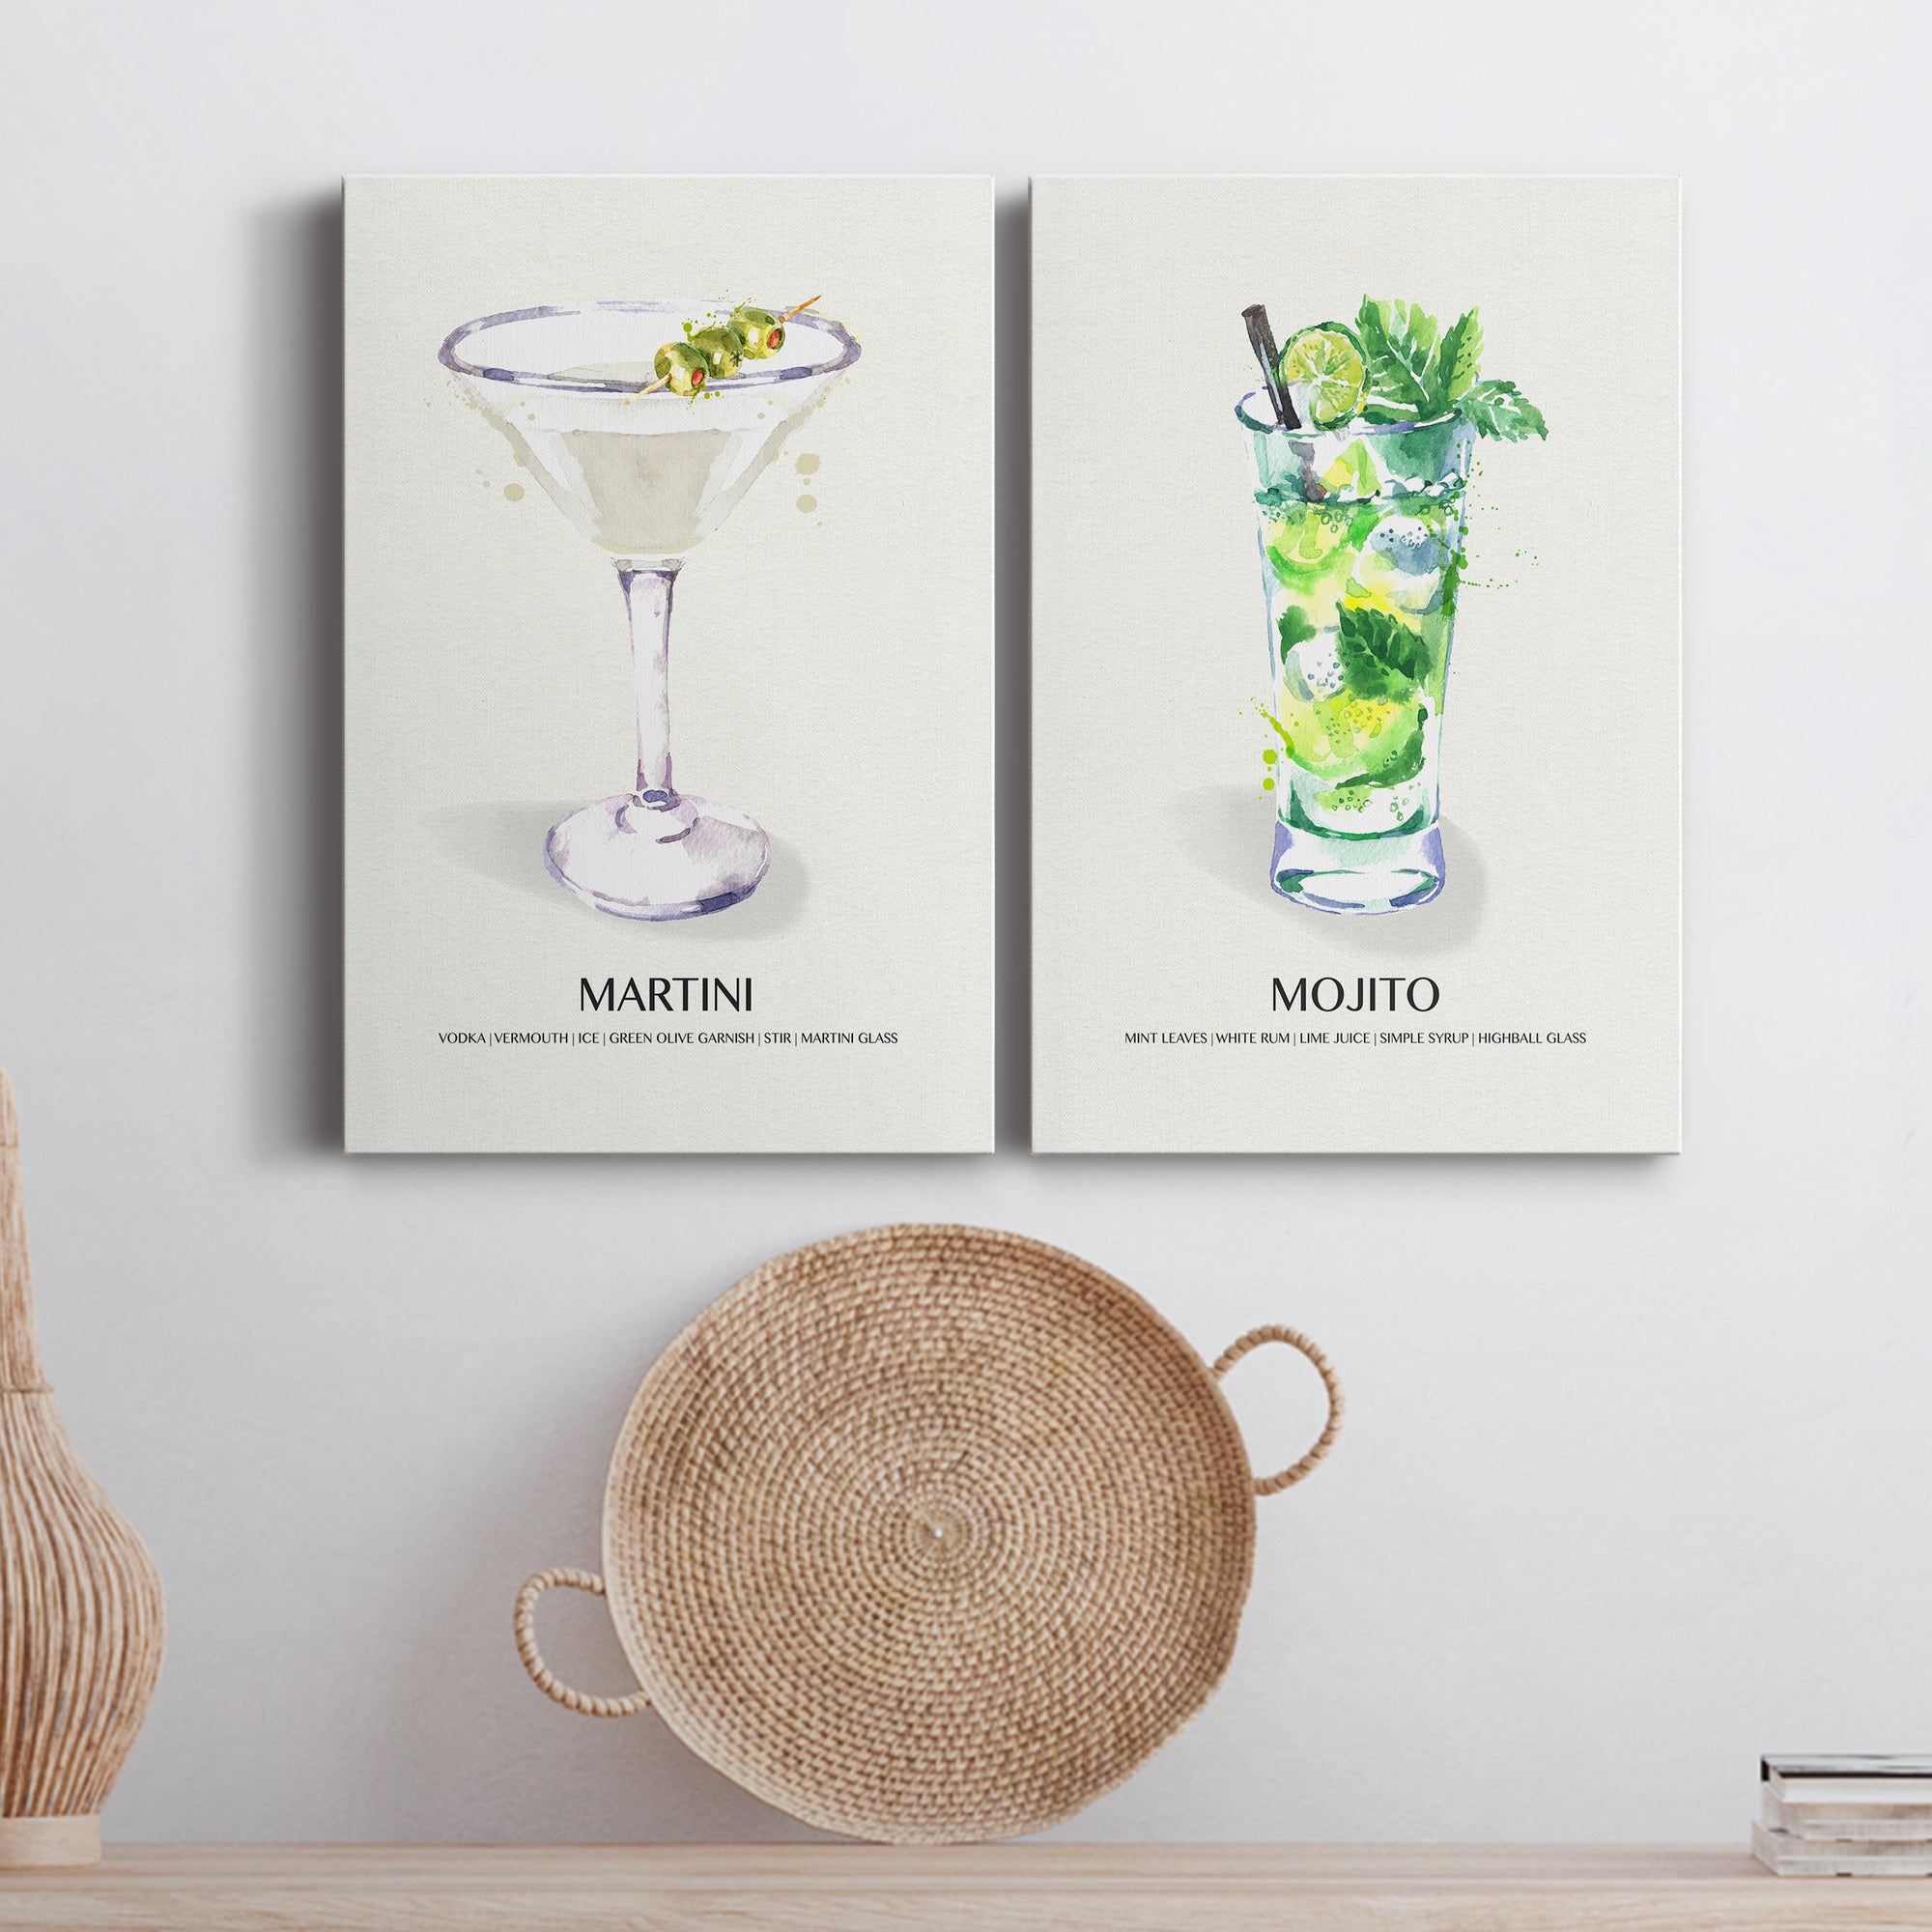 Martini Premium Gallery Wrapped Canvas - Ready to Hang - Set of 2 - 8 x 12 Each